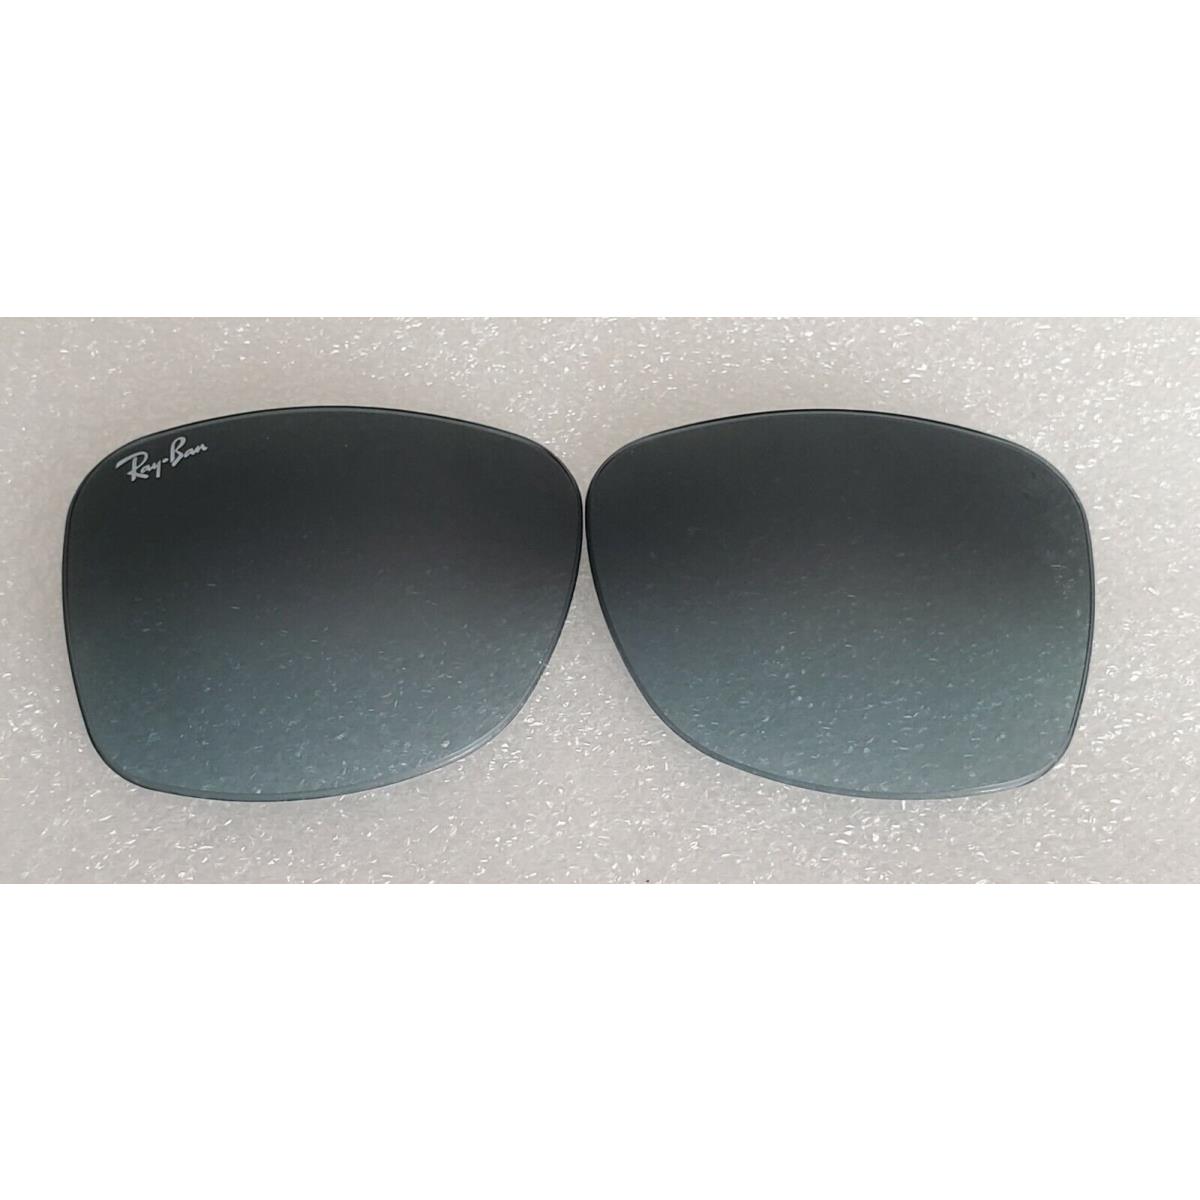 Ray Ban Rb2140 Rb4105 Rb4340 Wayfarer Replacement Lenses Blue Gradient 50mm Ray Ban Wayfarer Blue Gradient Fash Direct